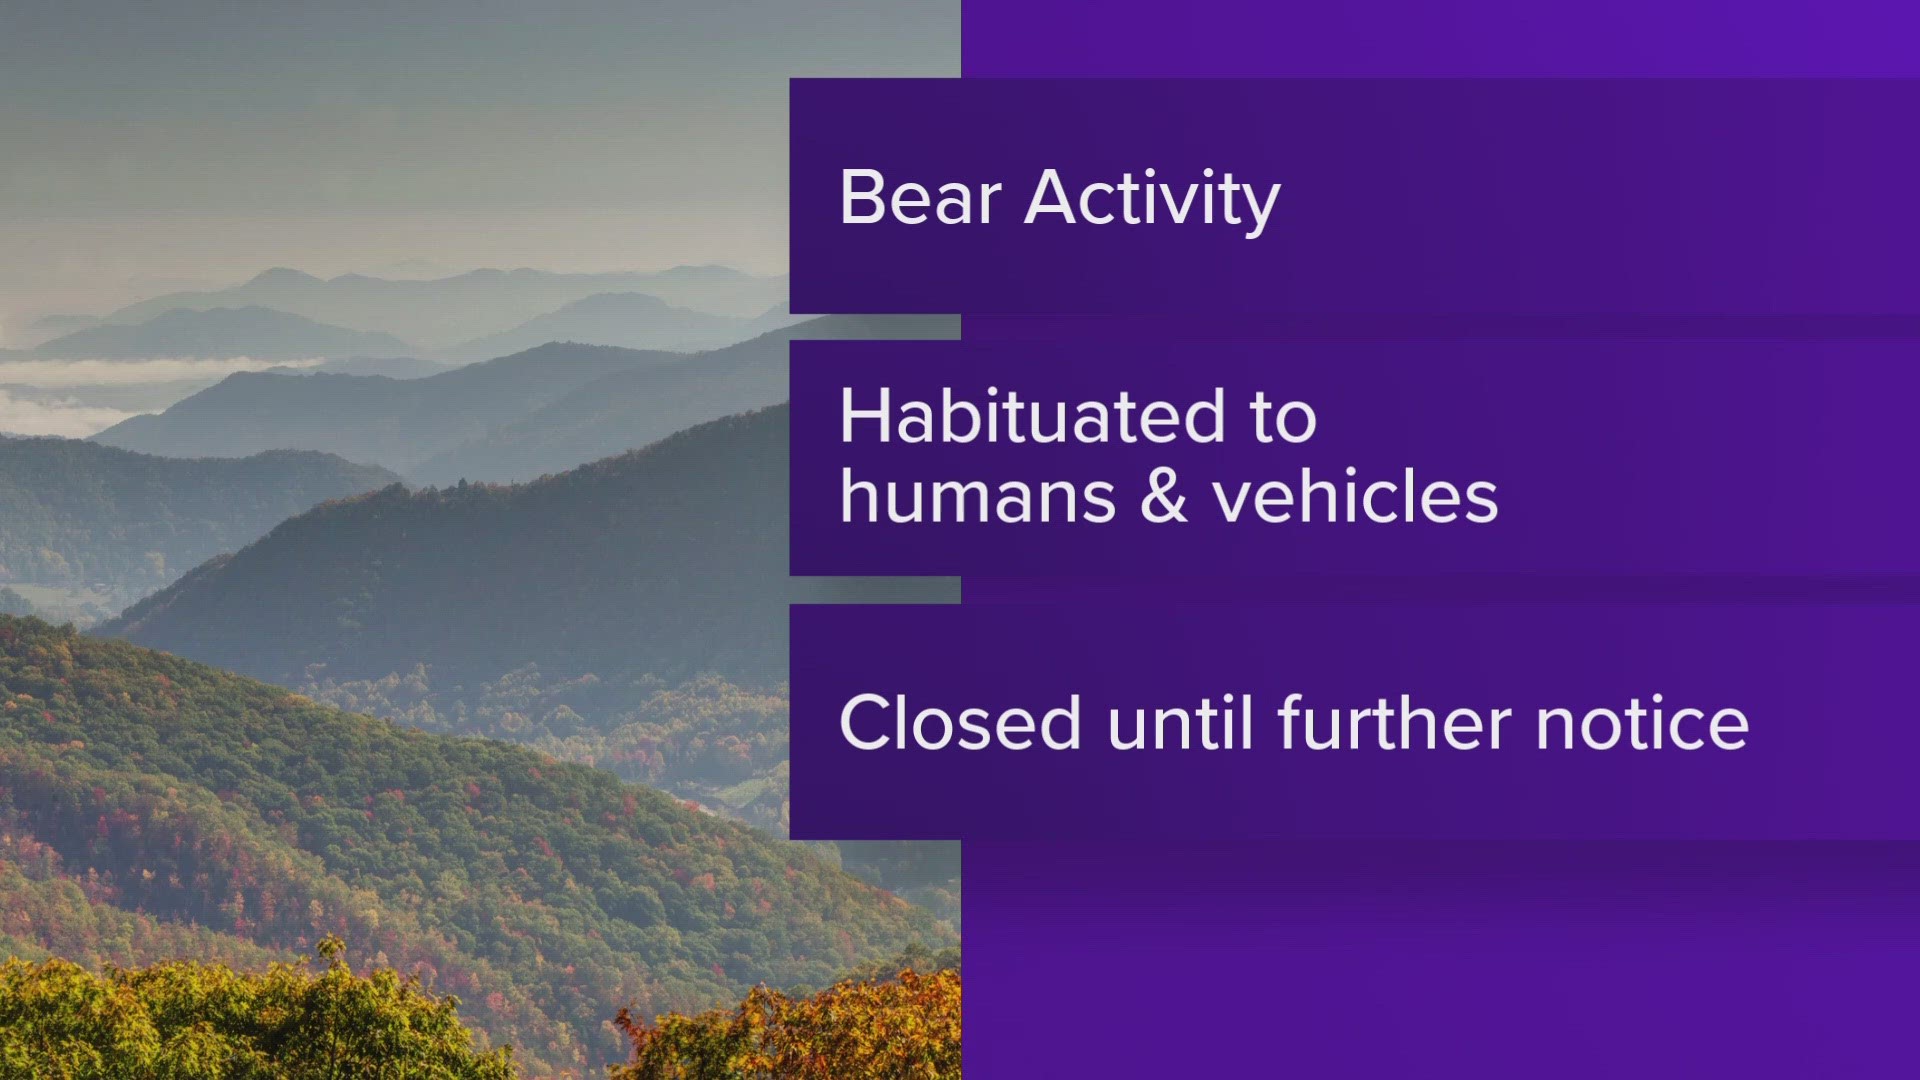 Park officials said a visitor encountered a bear that has become habituated to humans and vehicles. Rich Mountain Road is closed until further notice.